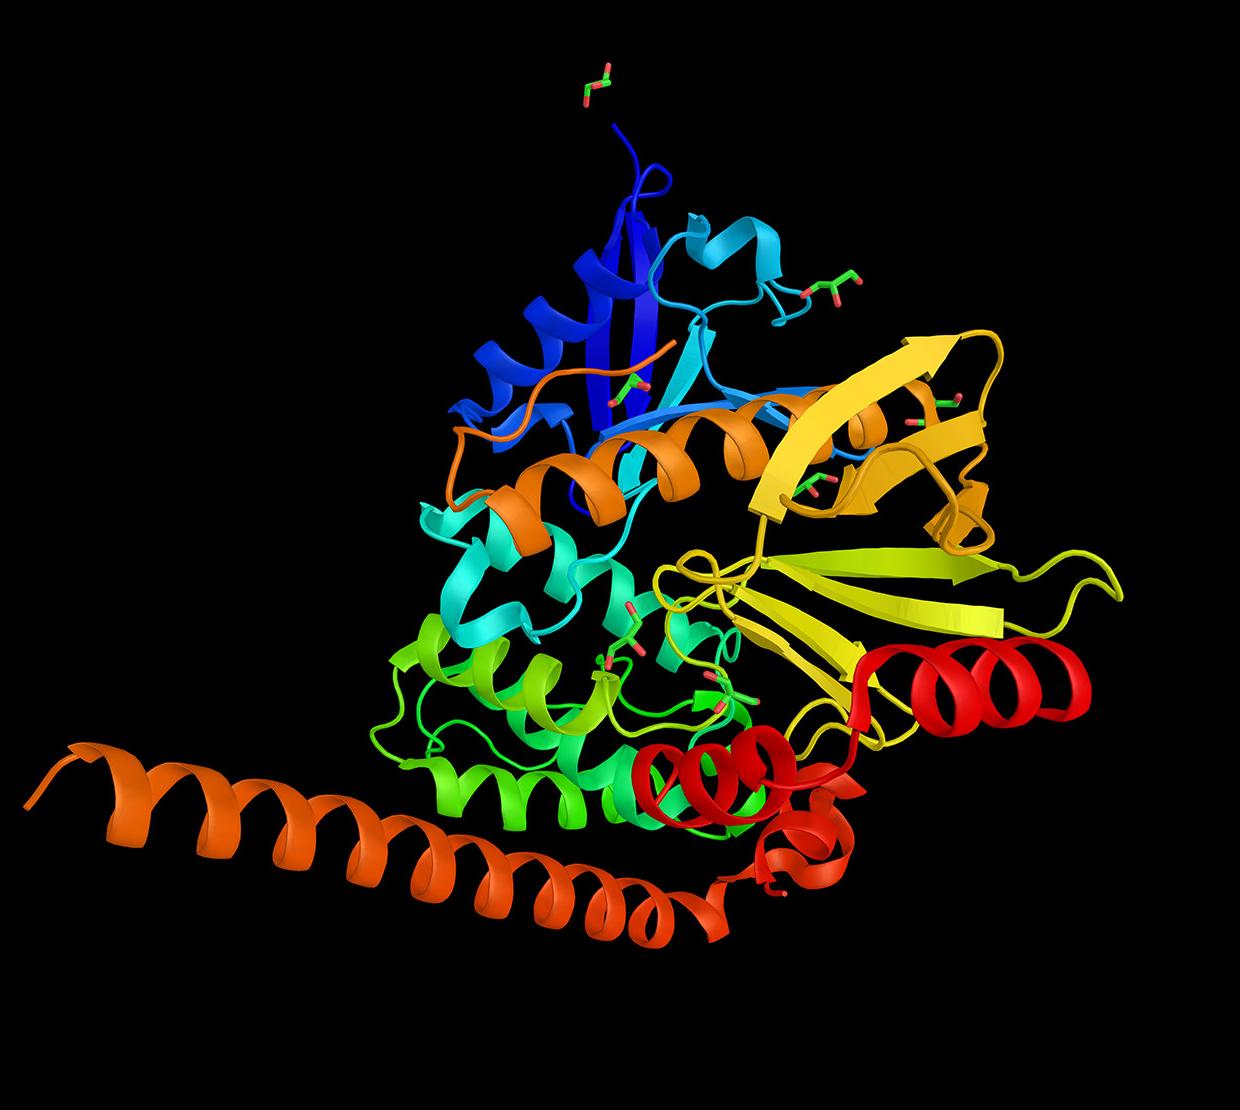 3d model of calprotectin protein